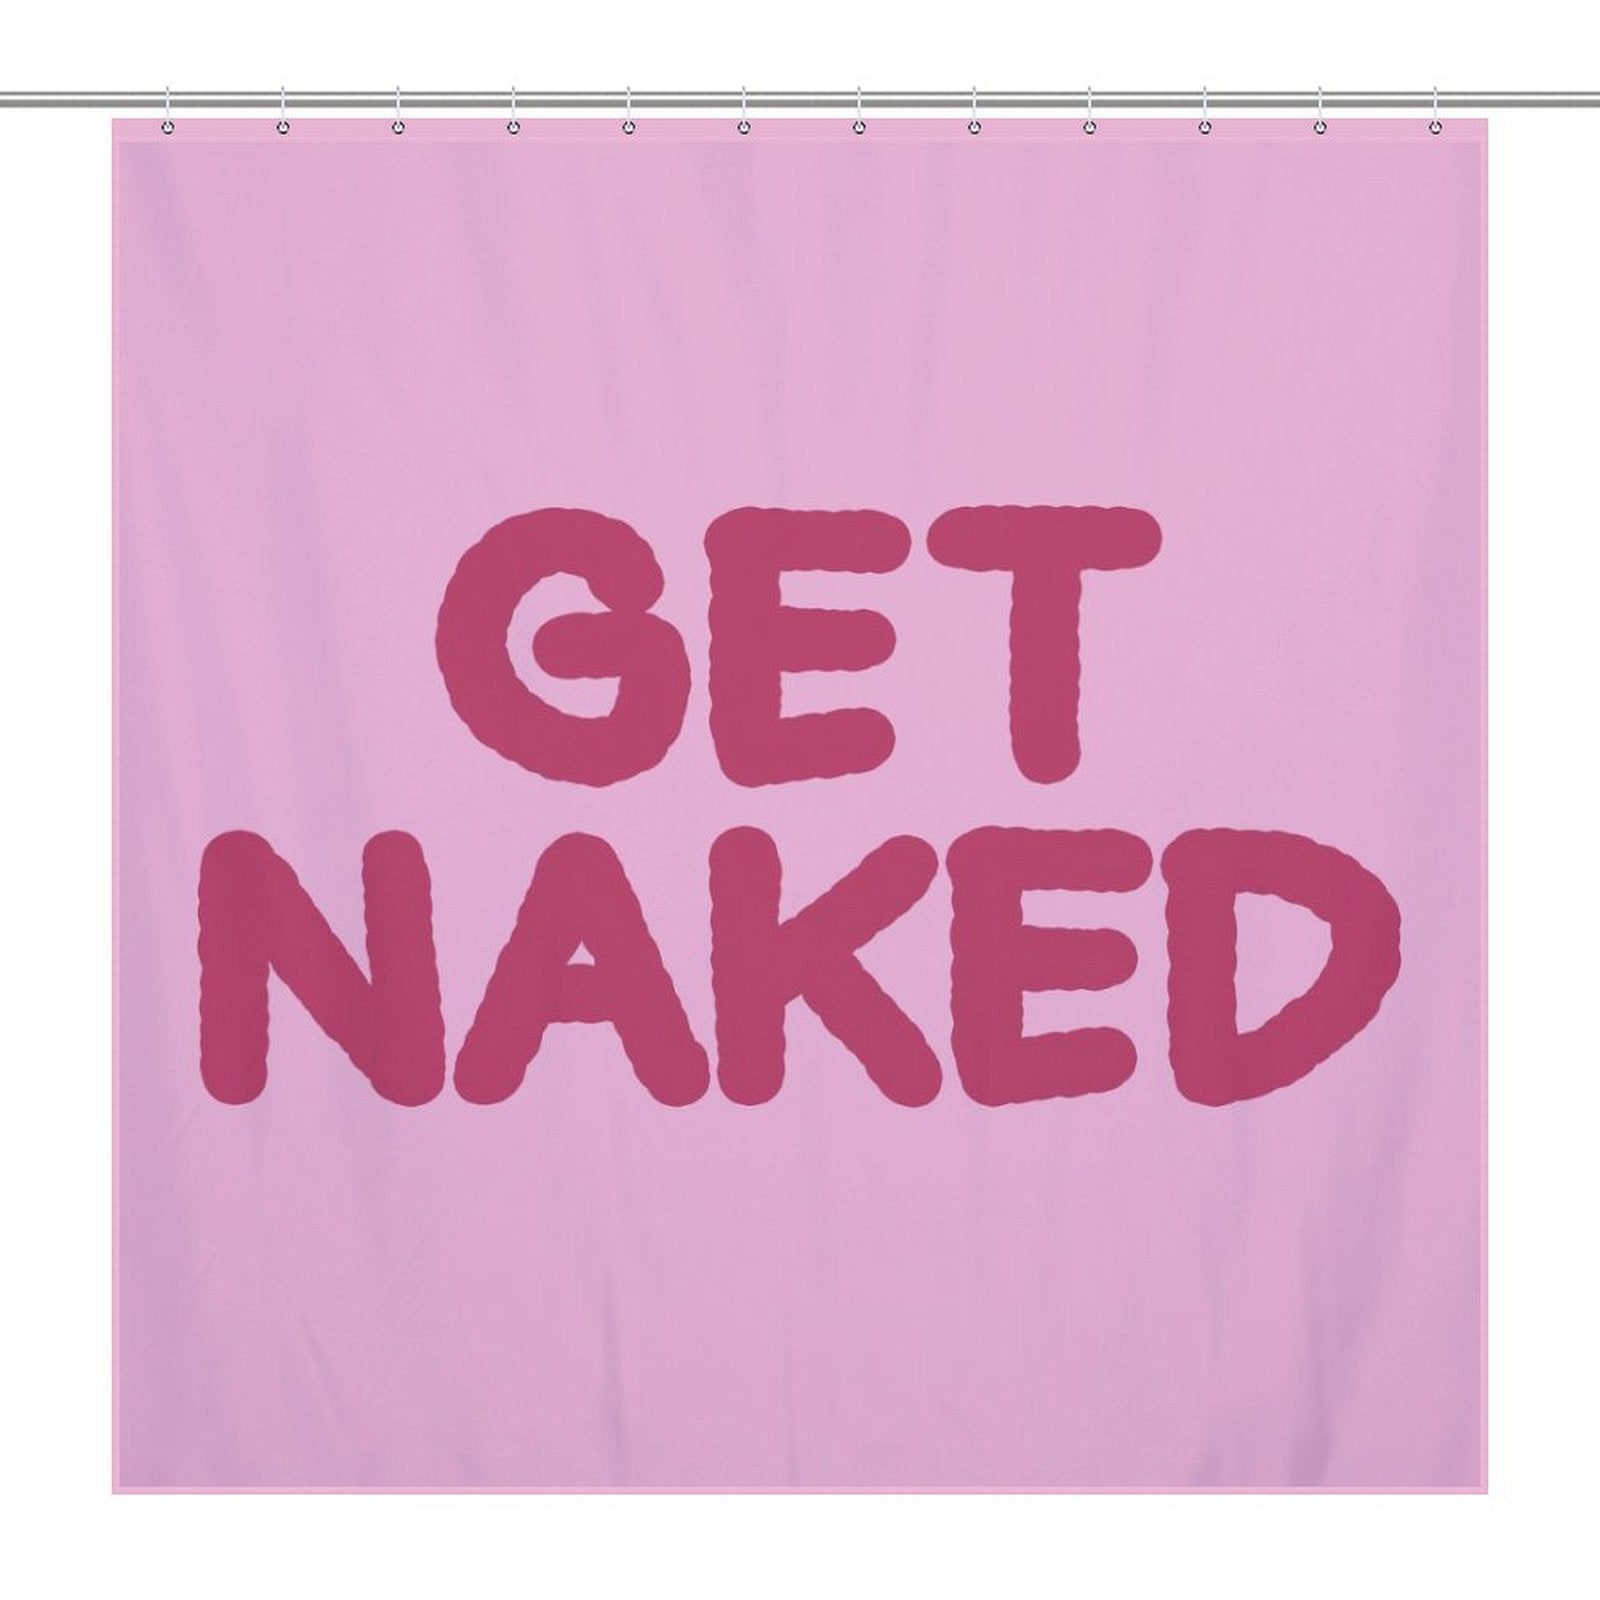 A Simple Funny Letters Pink Get Naked Shower Curtain-Cottoncat from Cotton Cat made from waterproof fabric with the words "GET NAKED" written in large, bold, red letters adds a touch of cheeky fun to your bathroom decor.